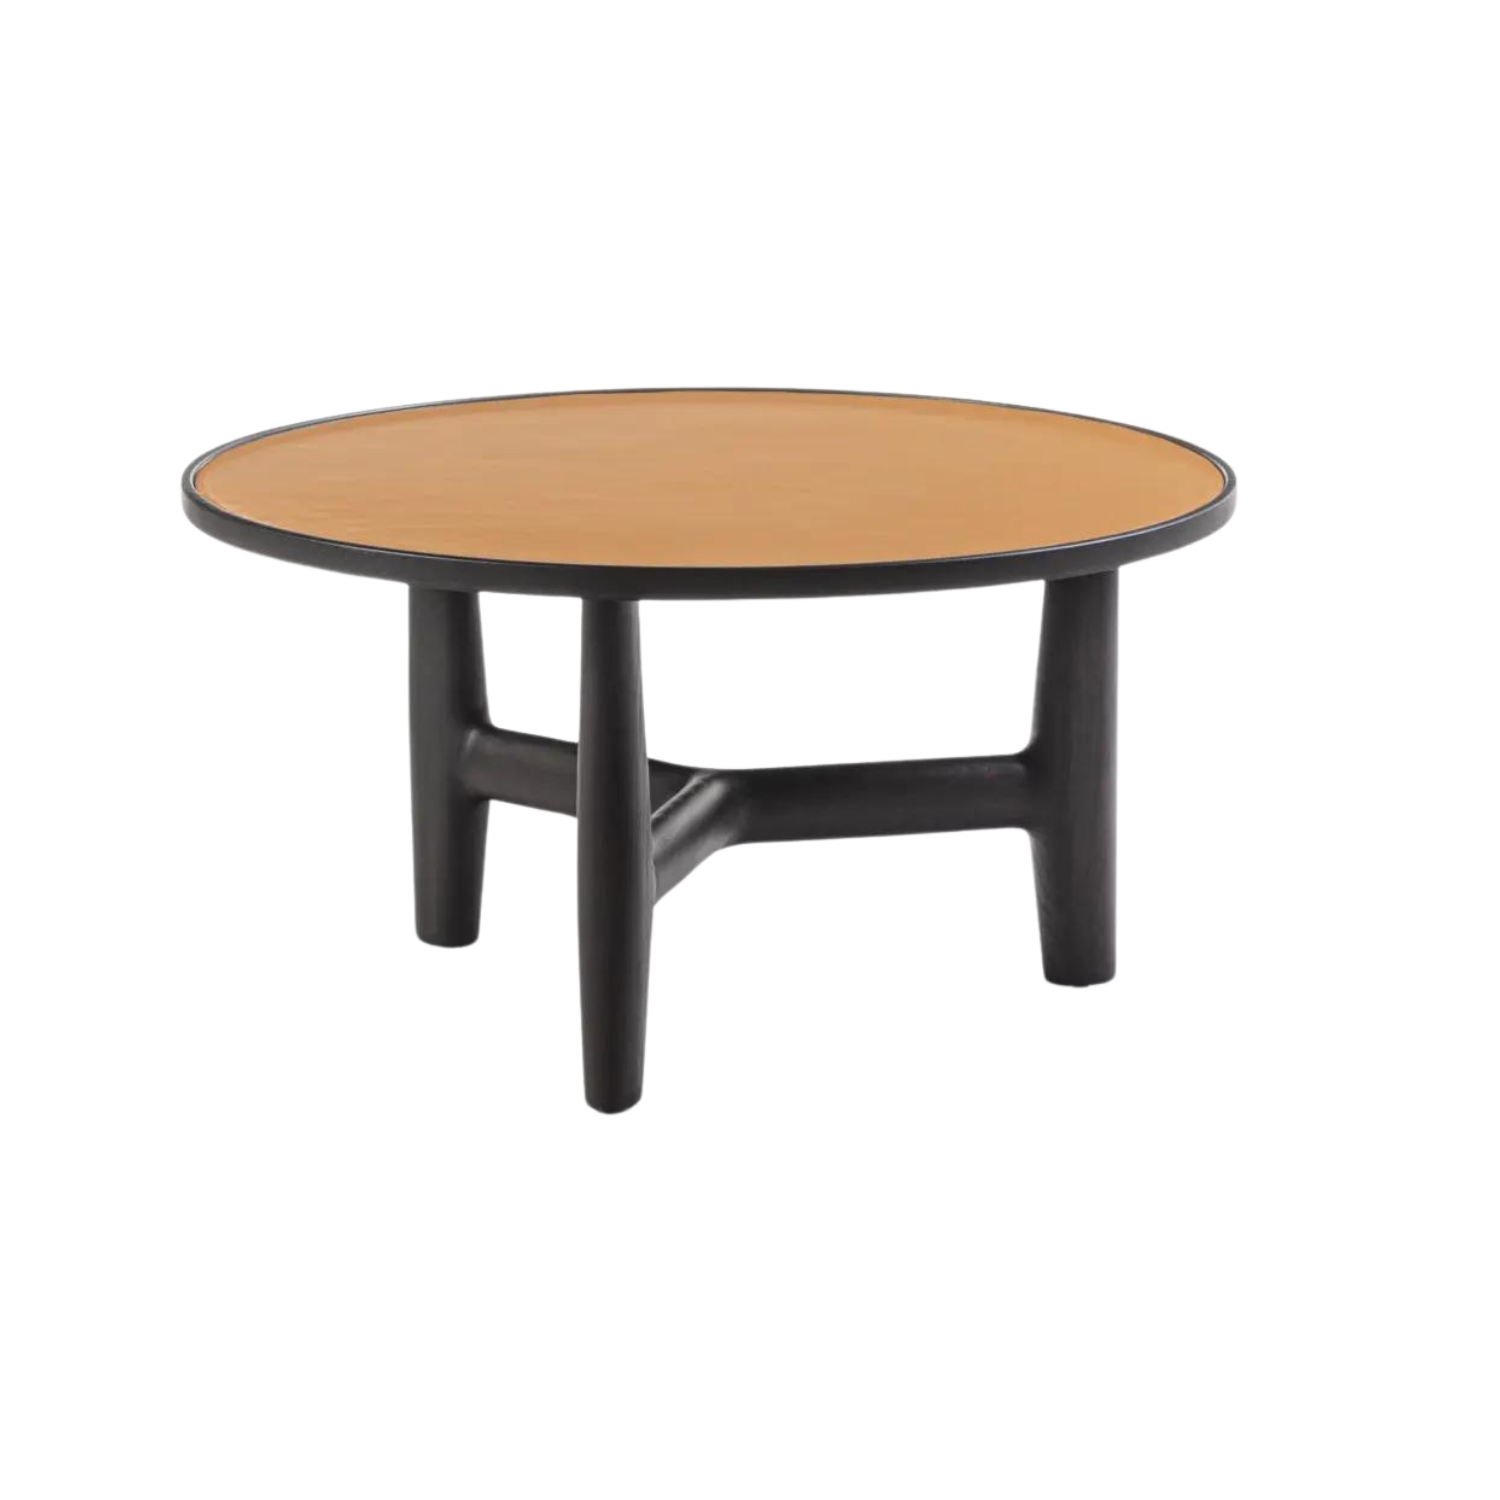 TILLOW 85 C - Side Table